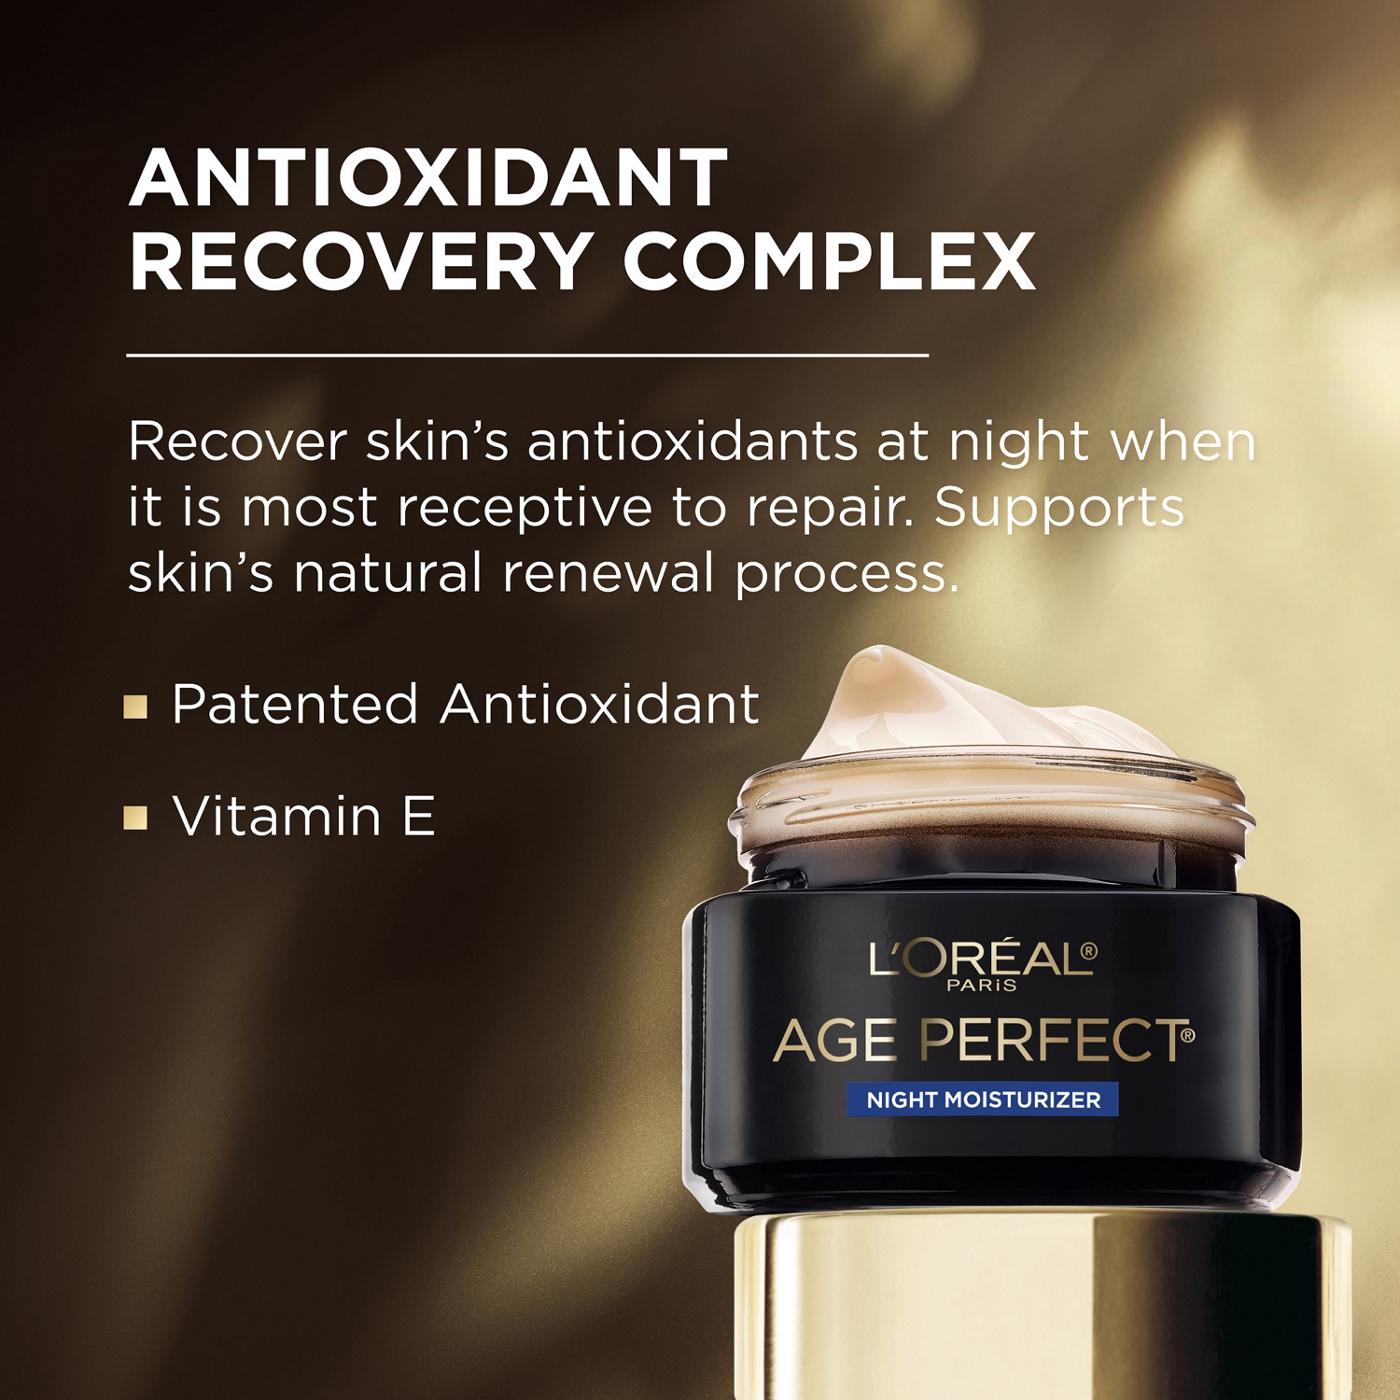 L'Oréal Paris Age Perfect Cell Renewal Anti-Aging Night Moisturizer; image 3 of 5